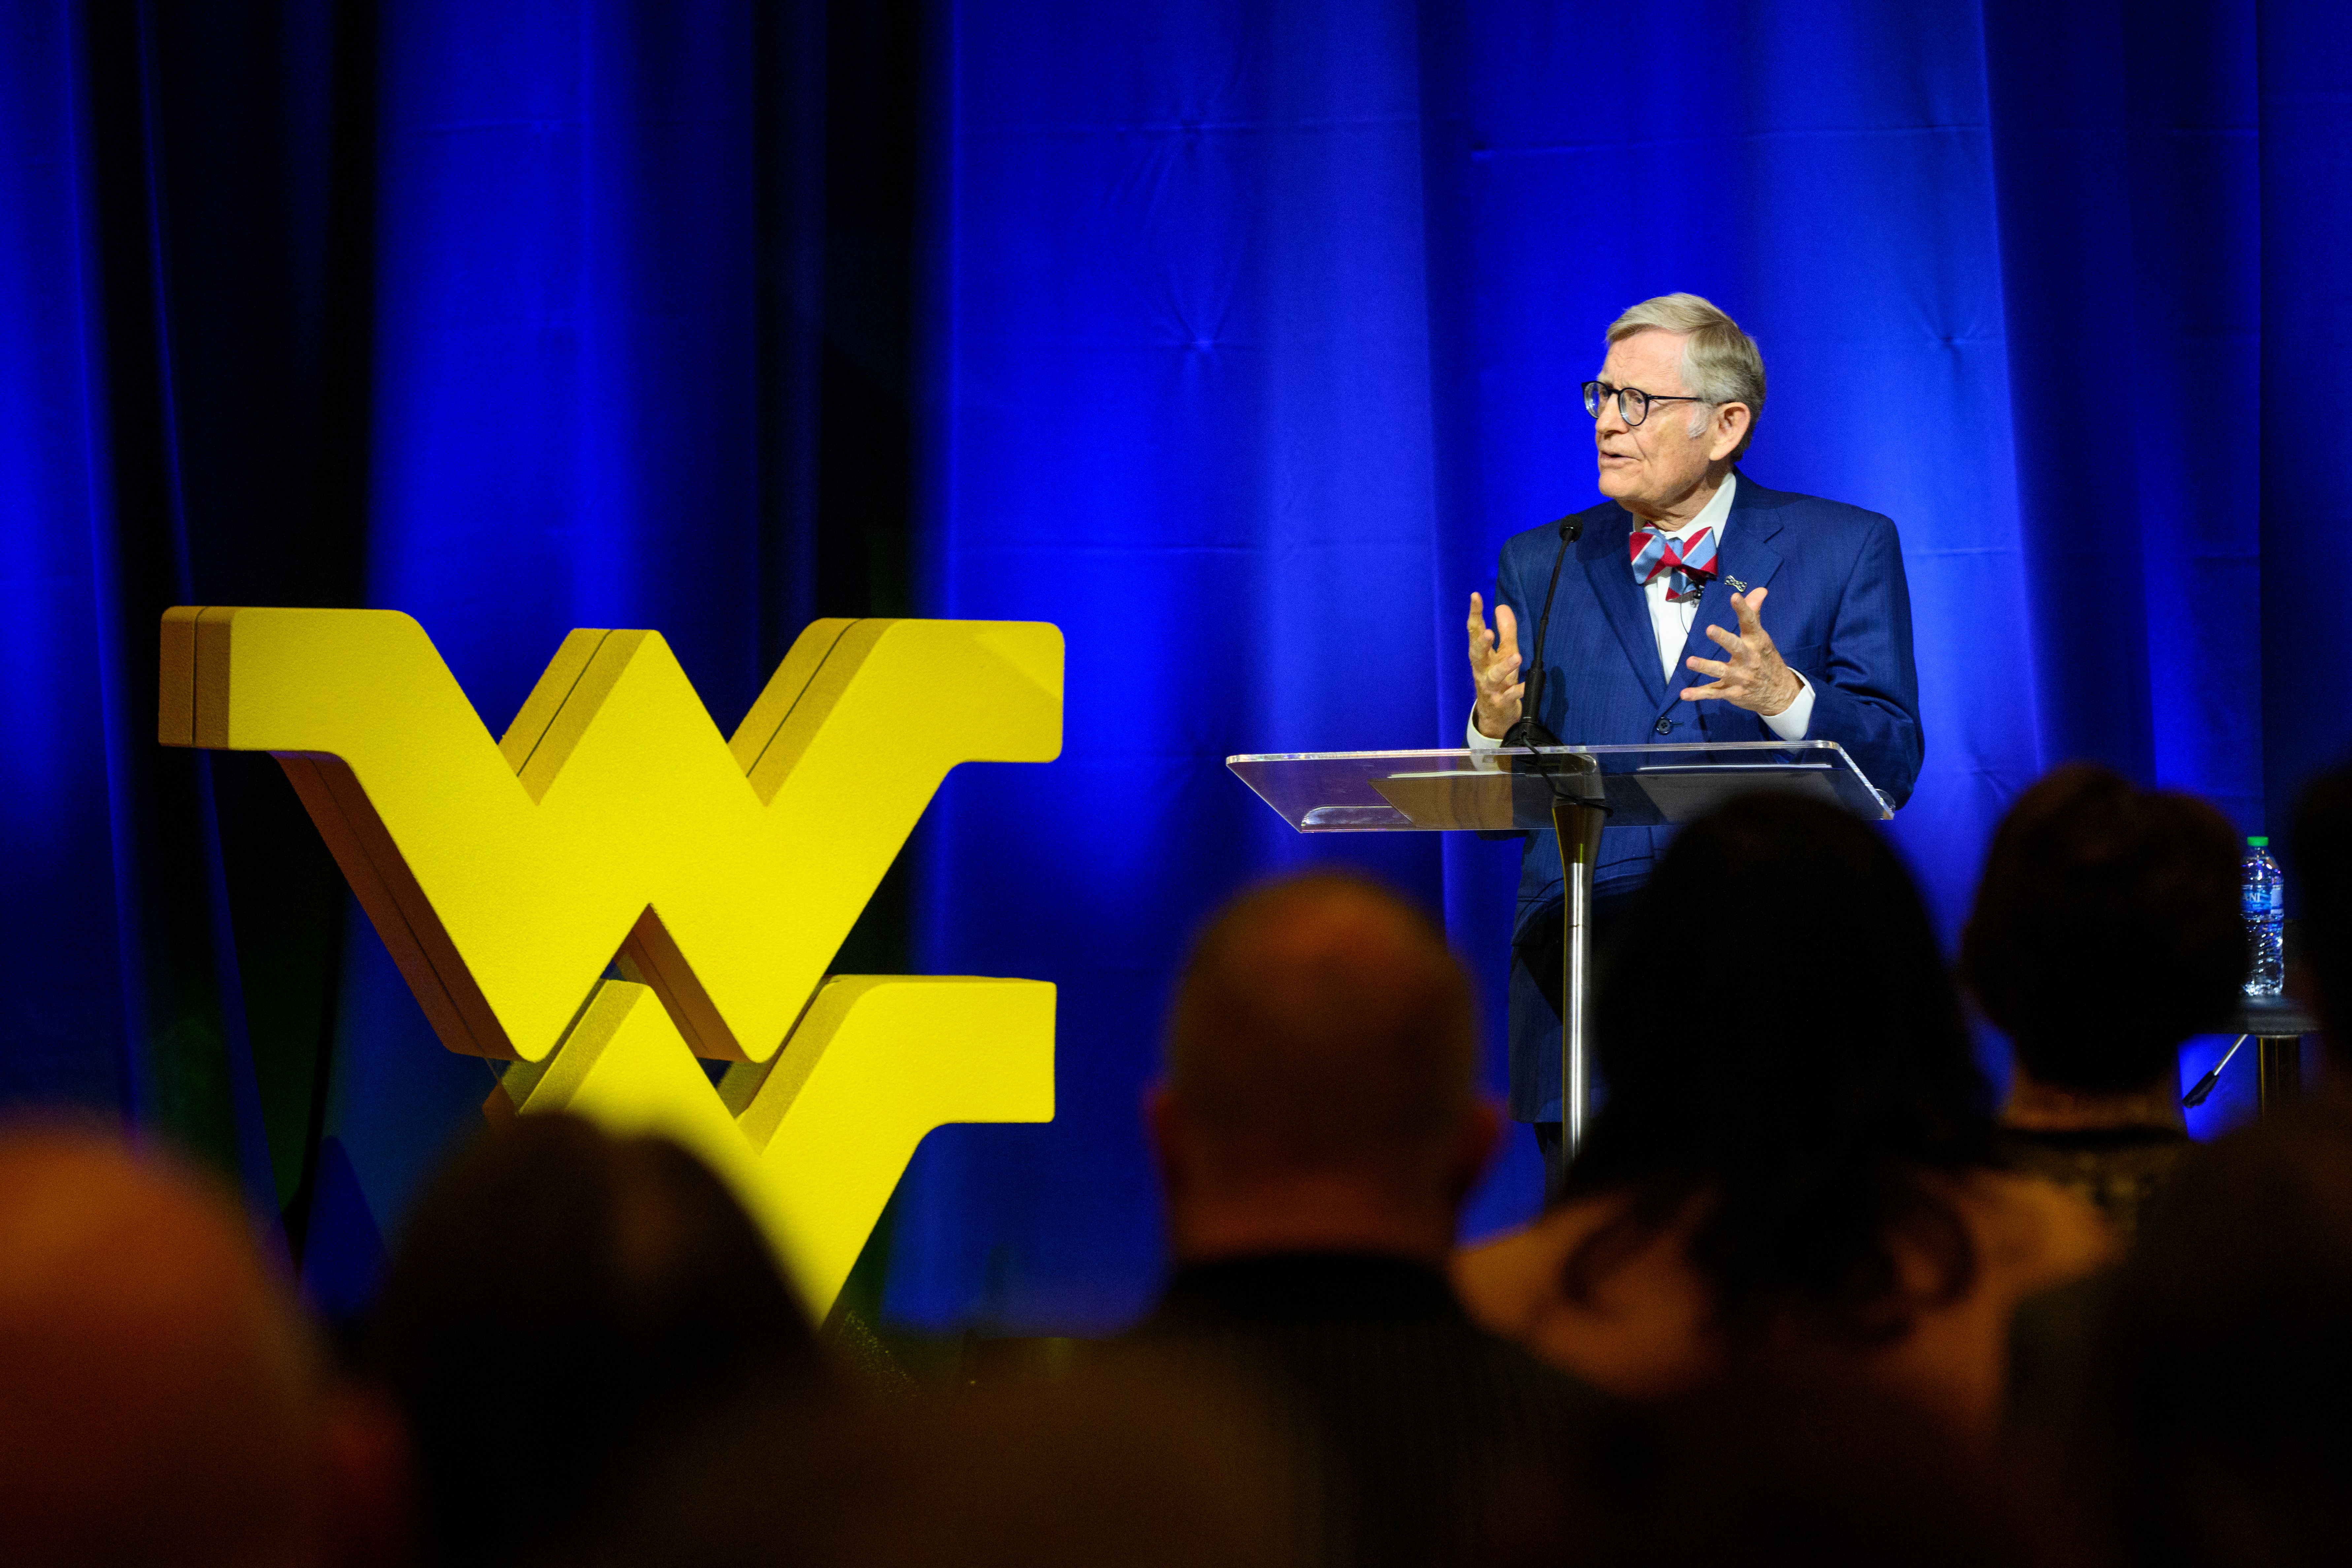 President Gordon Gee stands behind a clear podium in front of a blue curtain. A gold Flying WVU is to his right.